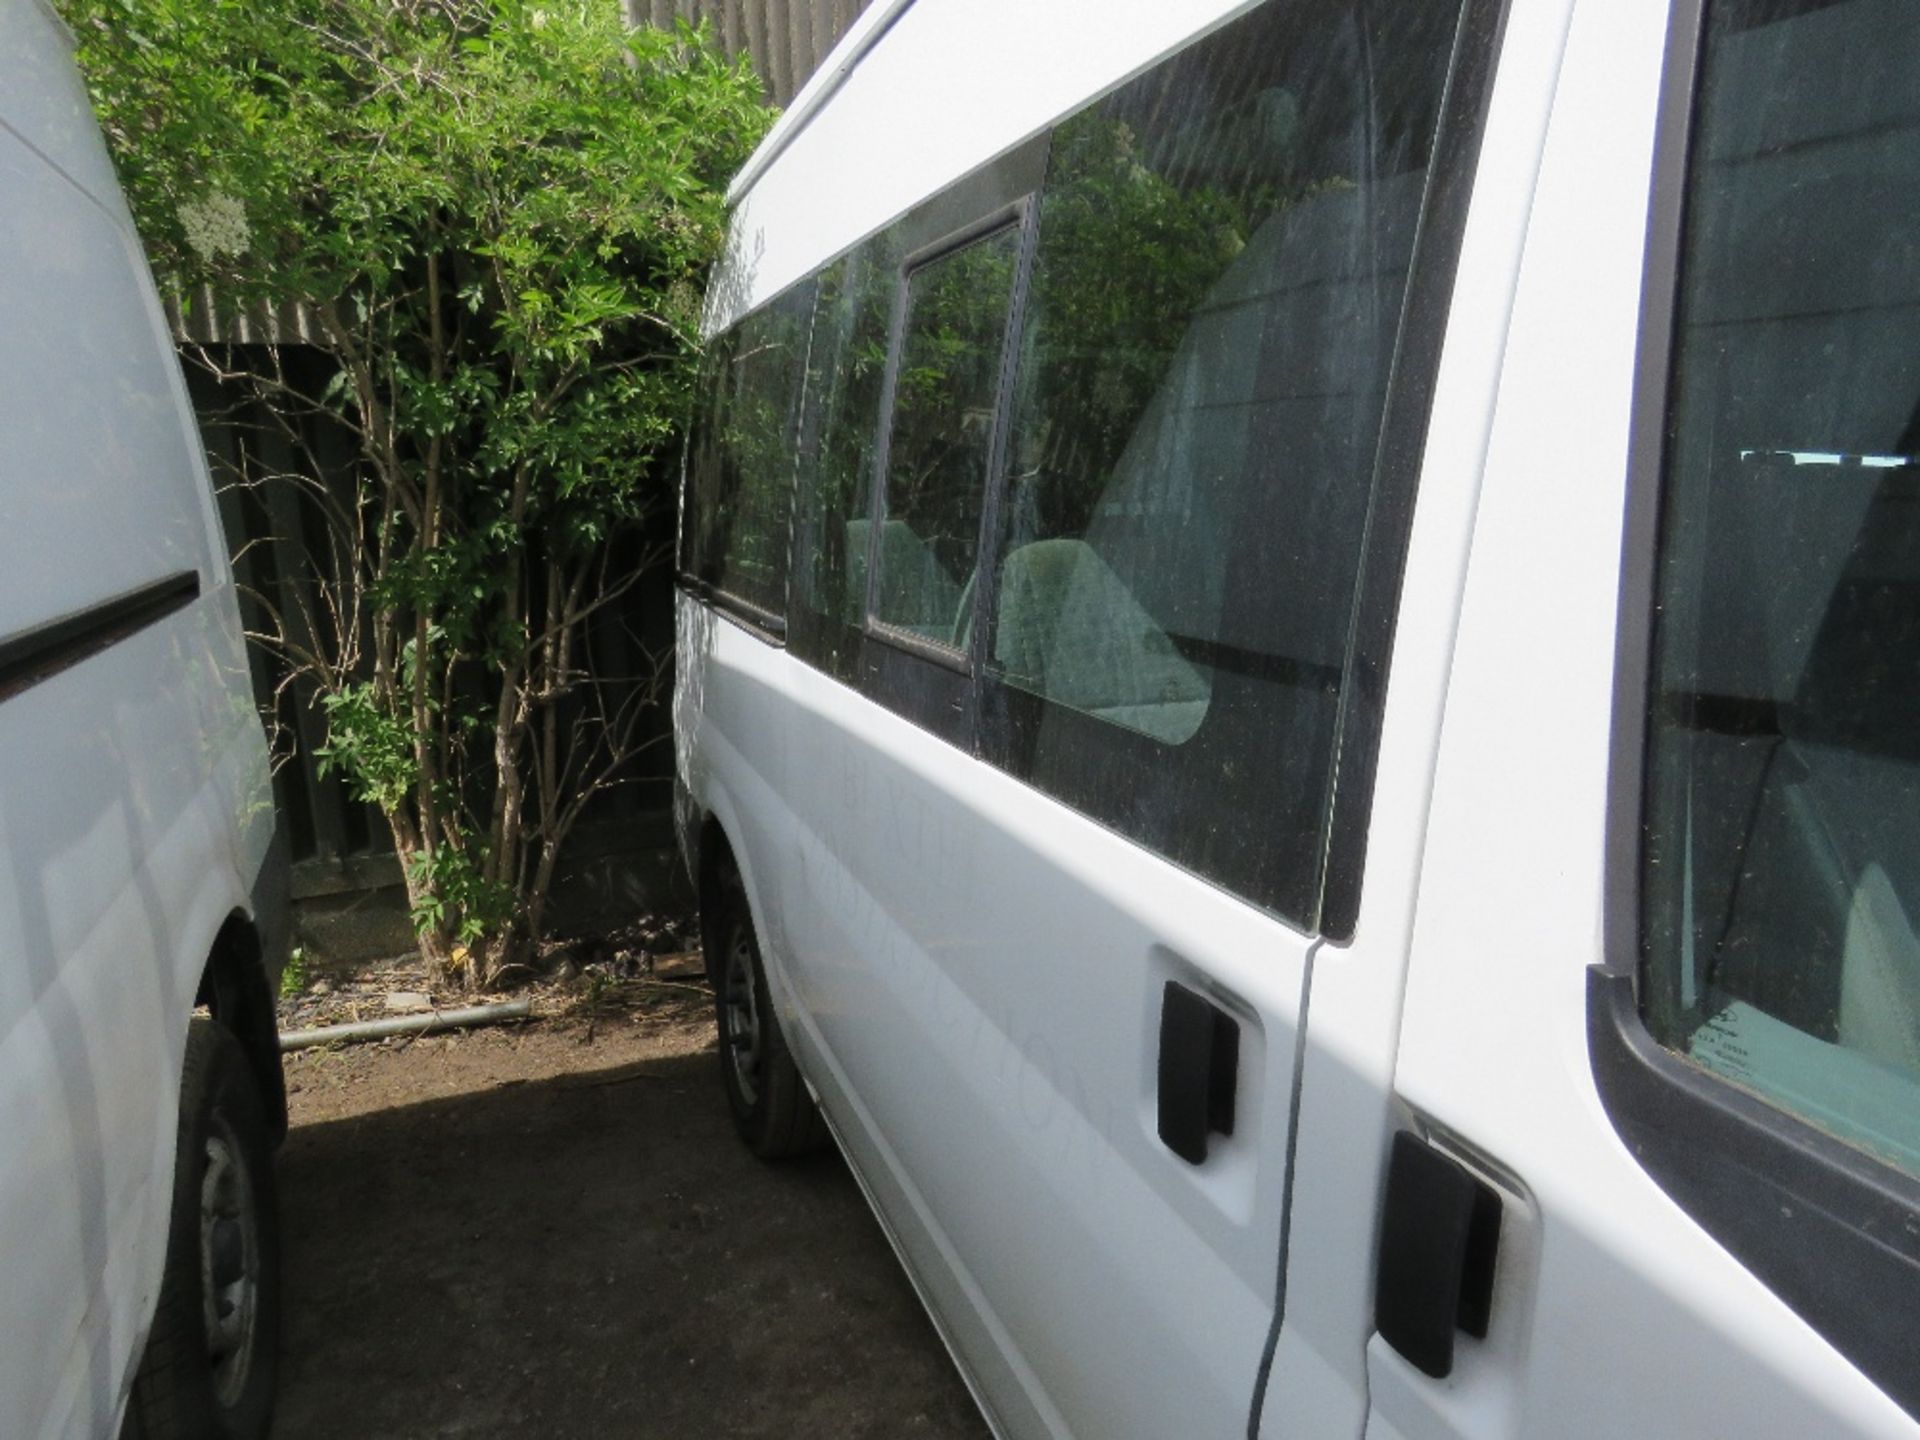 FORD TRANSIT 9 SEATER CREW MINI BUS VAN WITH REAR STORAGE, REG: MF11 NNK TESTED TILL 08/04/21, 156, - Image 2 of 5